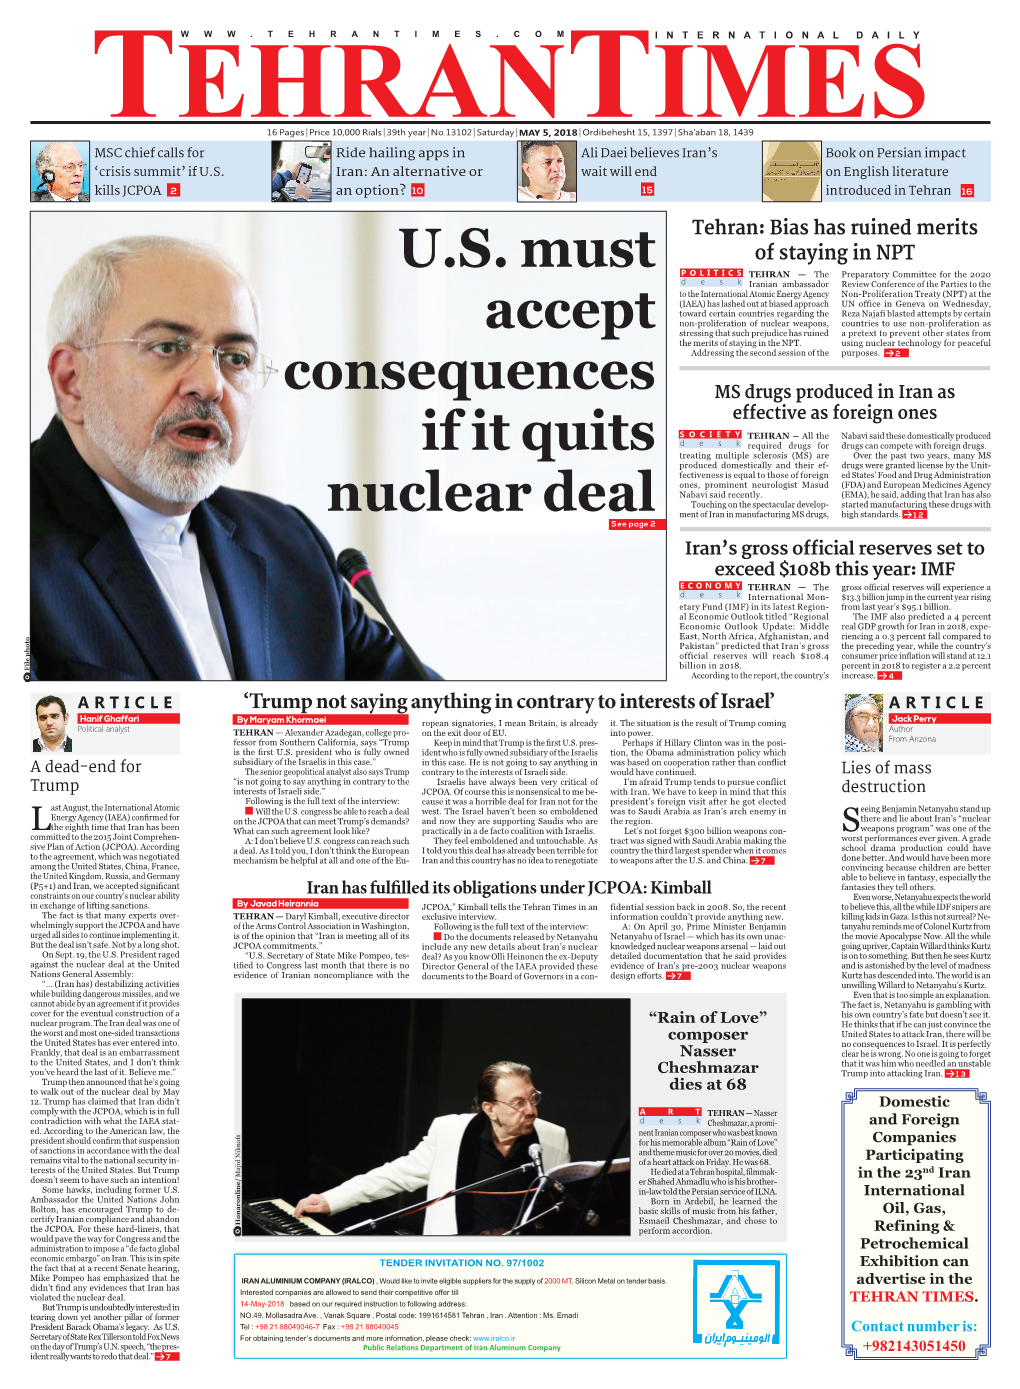 U.S. Must Accept Consequences If It Quits Nuclear Deal